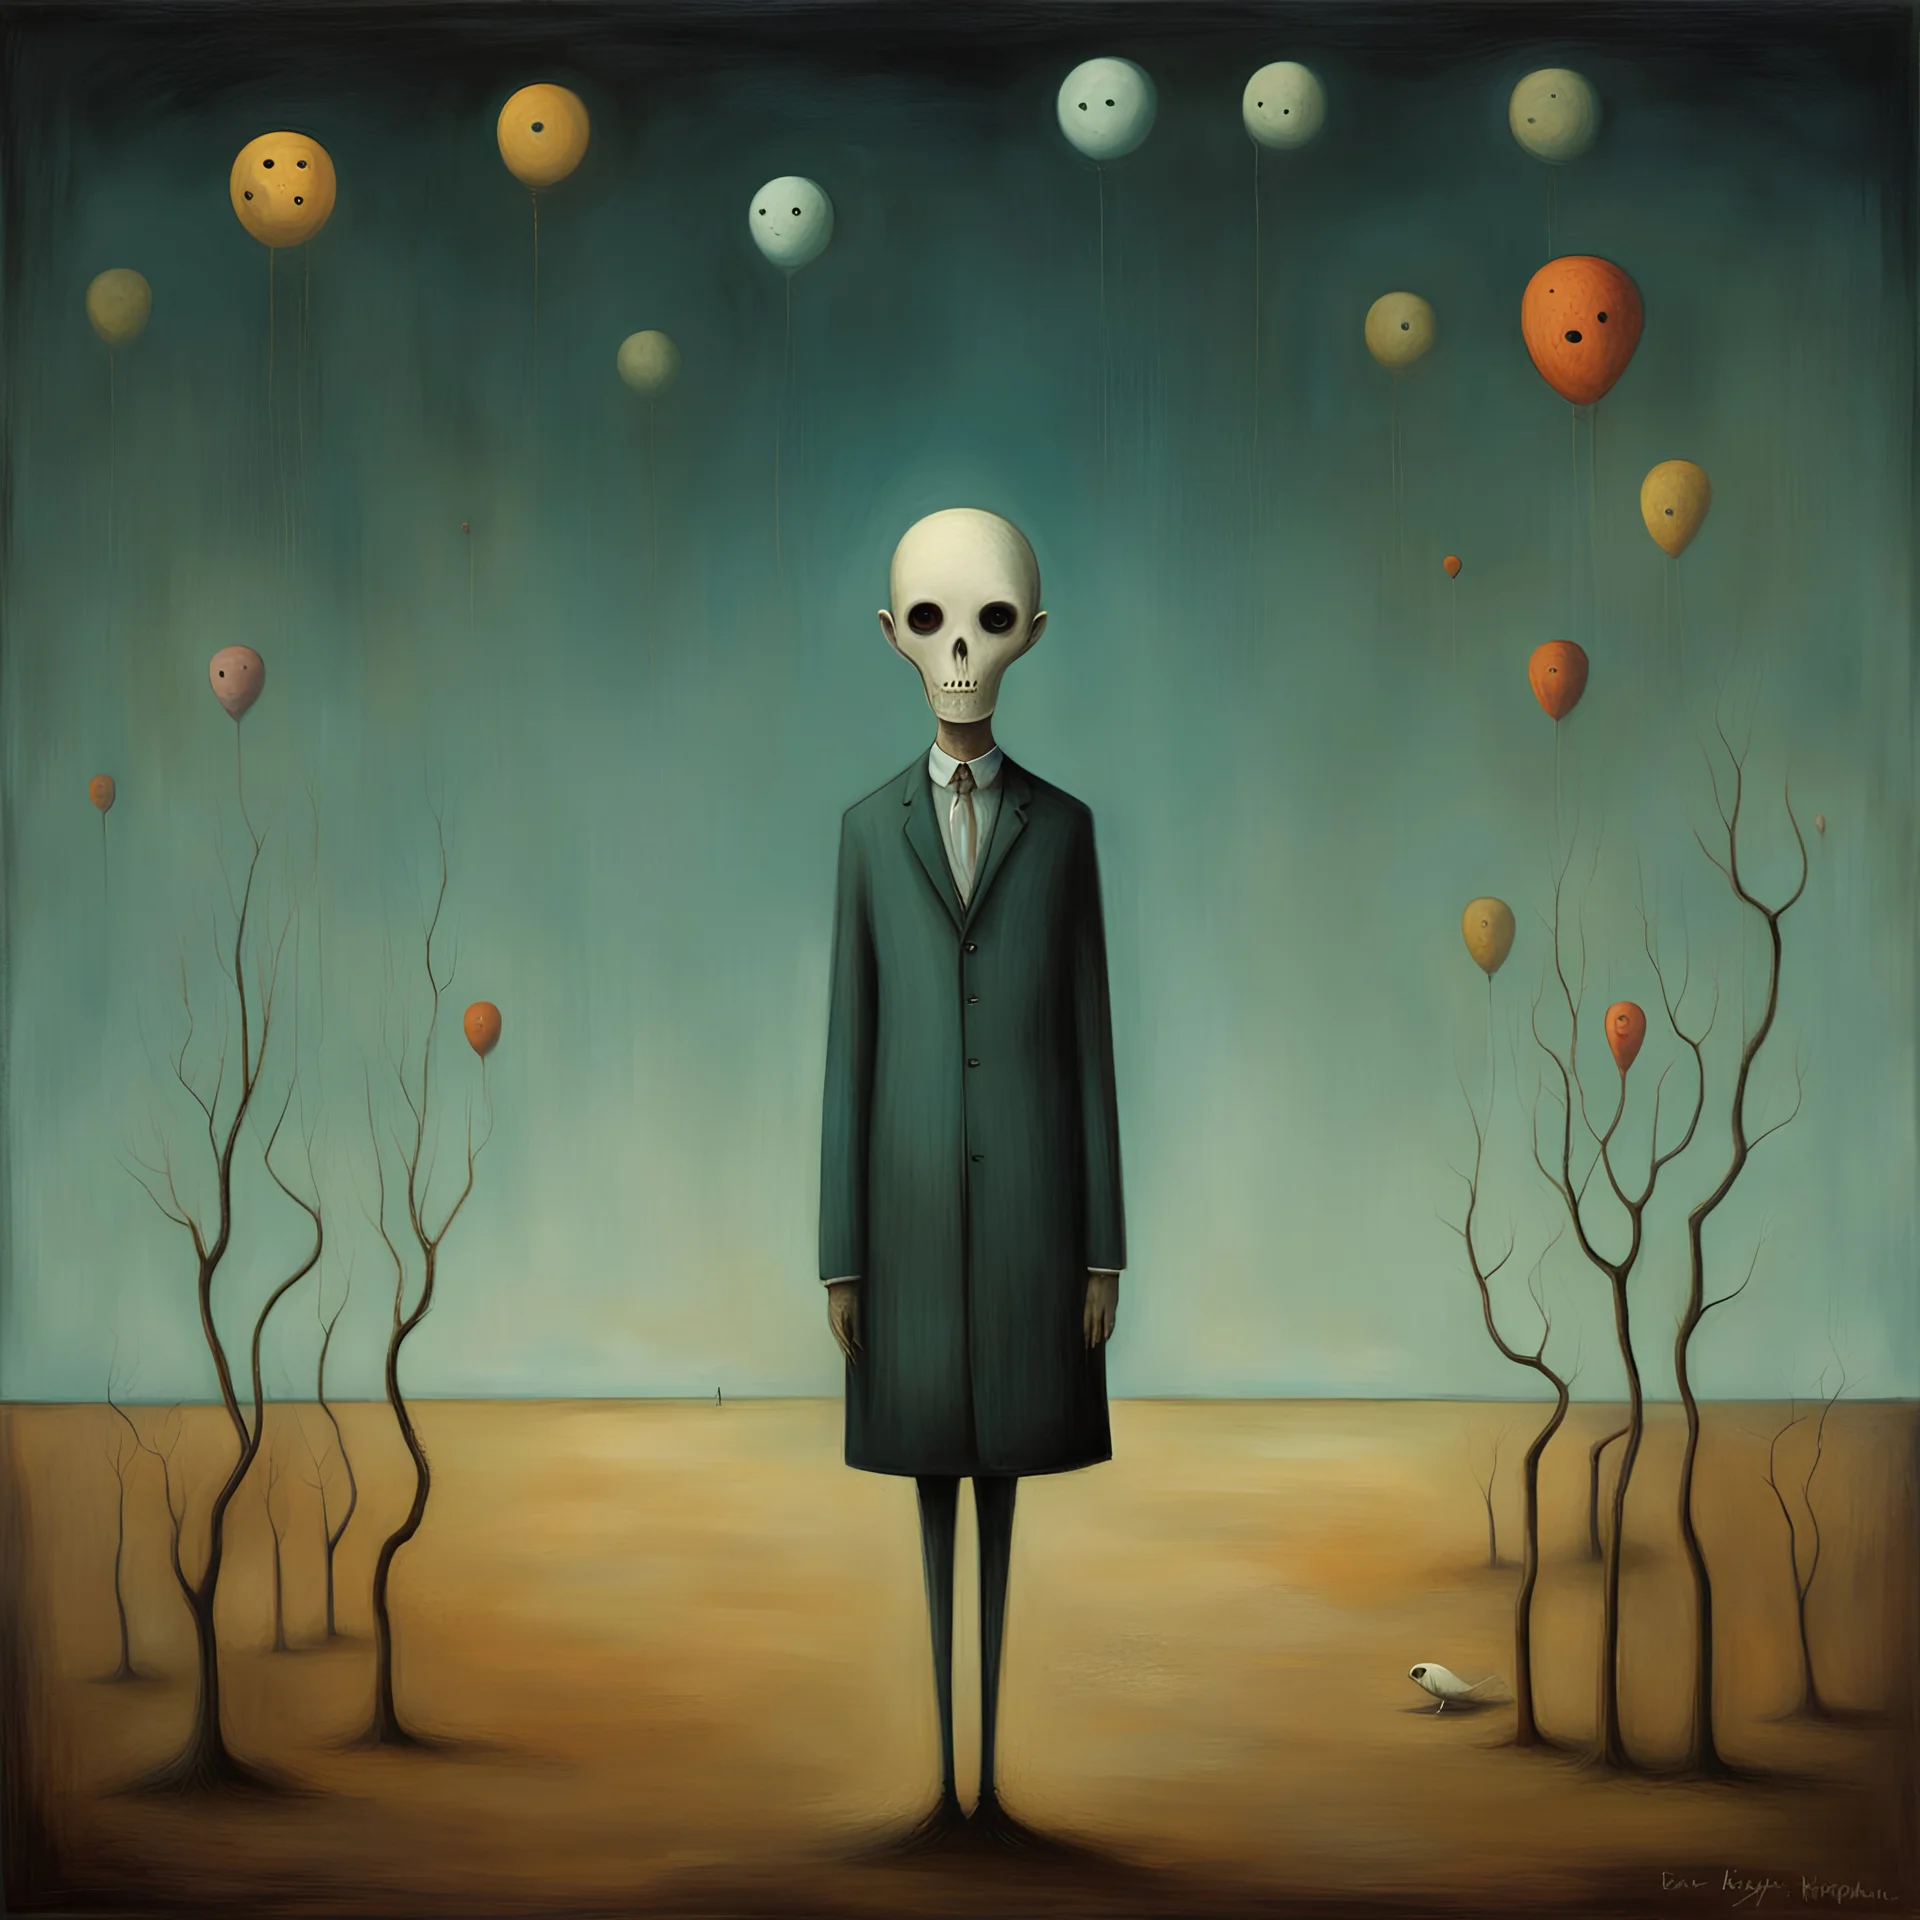 Surreal sinister weirdness Style by Duy Huynh and Clive Barker and Max Ernst, fractional reserve daydream <lora:SurrealHorror:0.6> , strange inconsistencies and absurdities, eerie, weird colors, smooth, neo surrealism, abstract quirks by Bruno Munari, album art